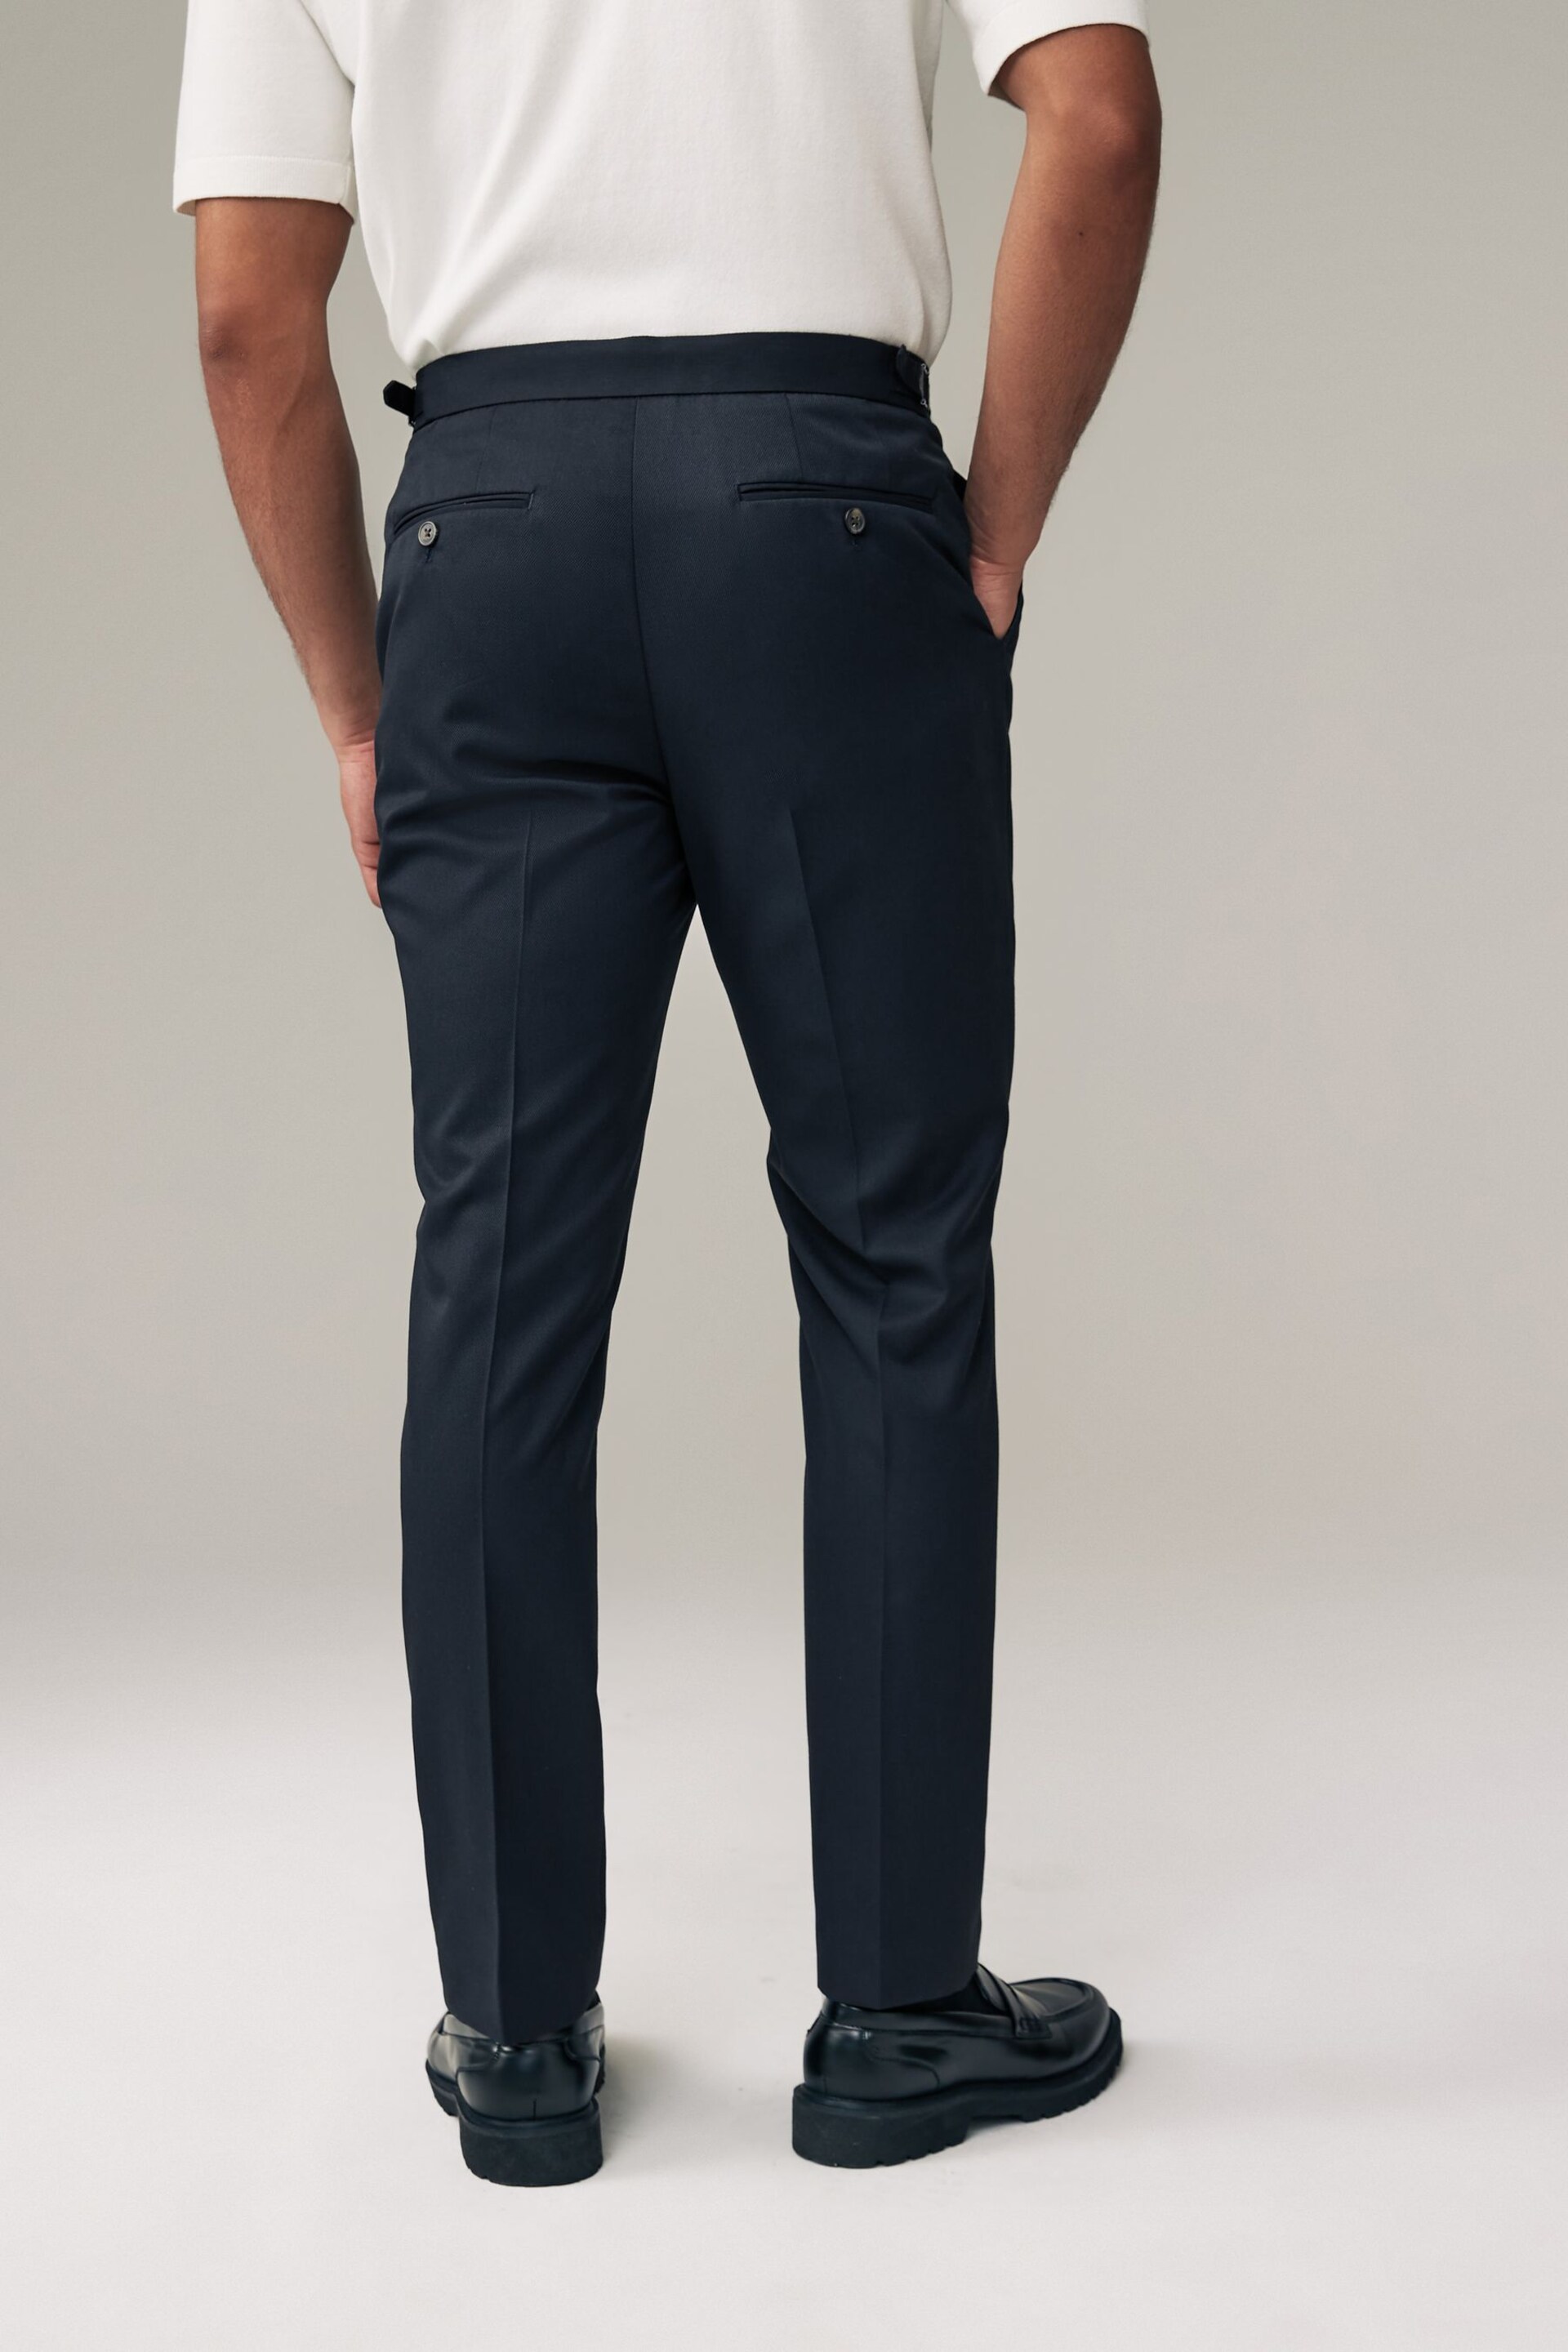 Navy Blue Slim Fit Smart Twill Side Adjuster Trousers - Image 3 of 9